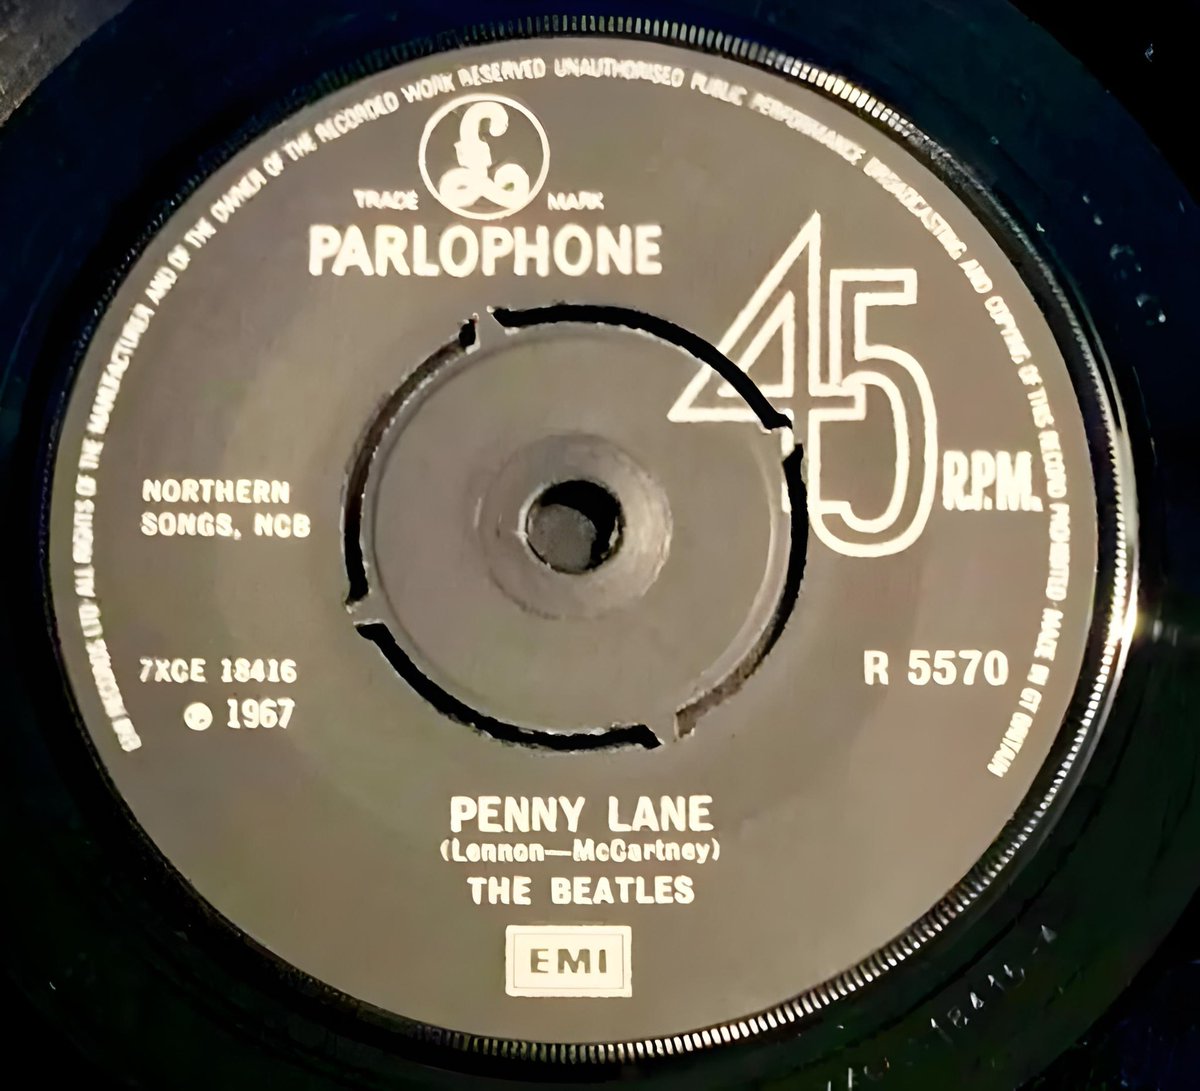 Penny Lane, released in 1967, has been described as the greatest single ever released. Would you agree? Link below to play 🎶 m.youtube.com/watch?v=S-rB0p…